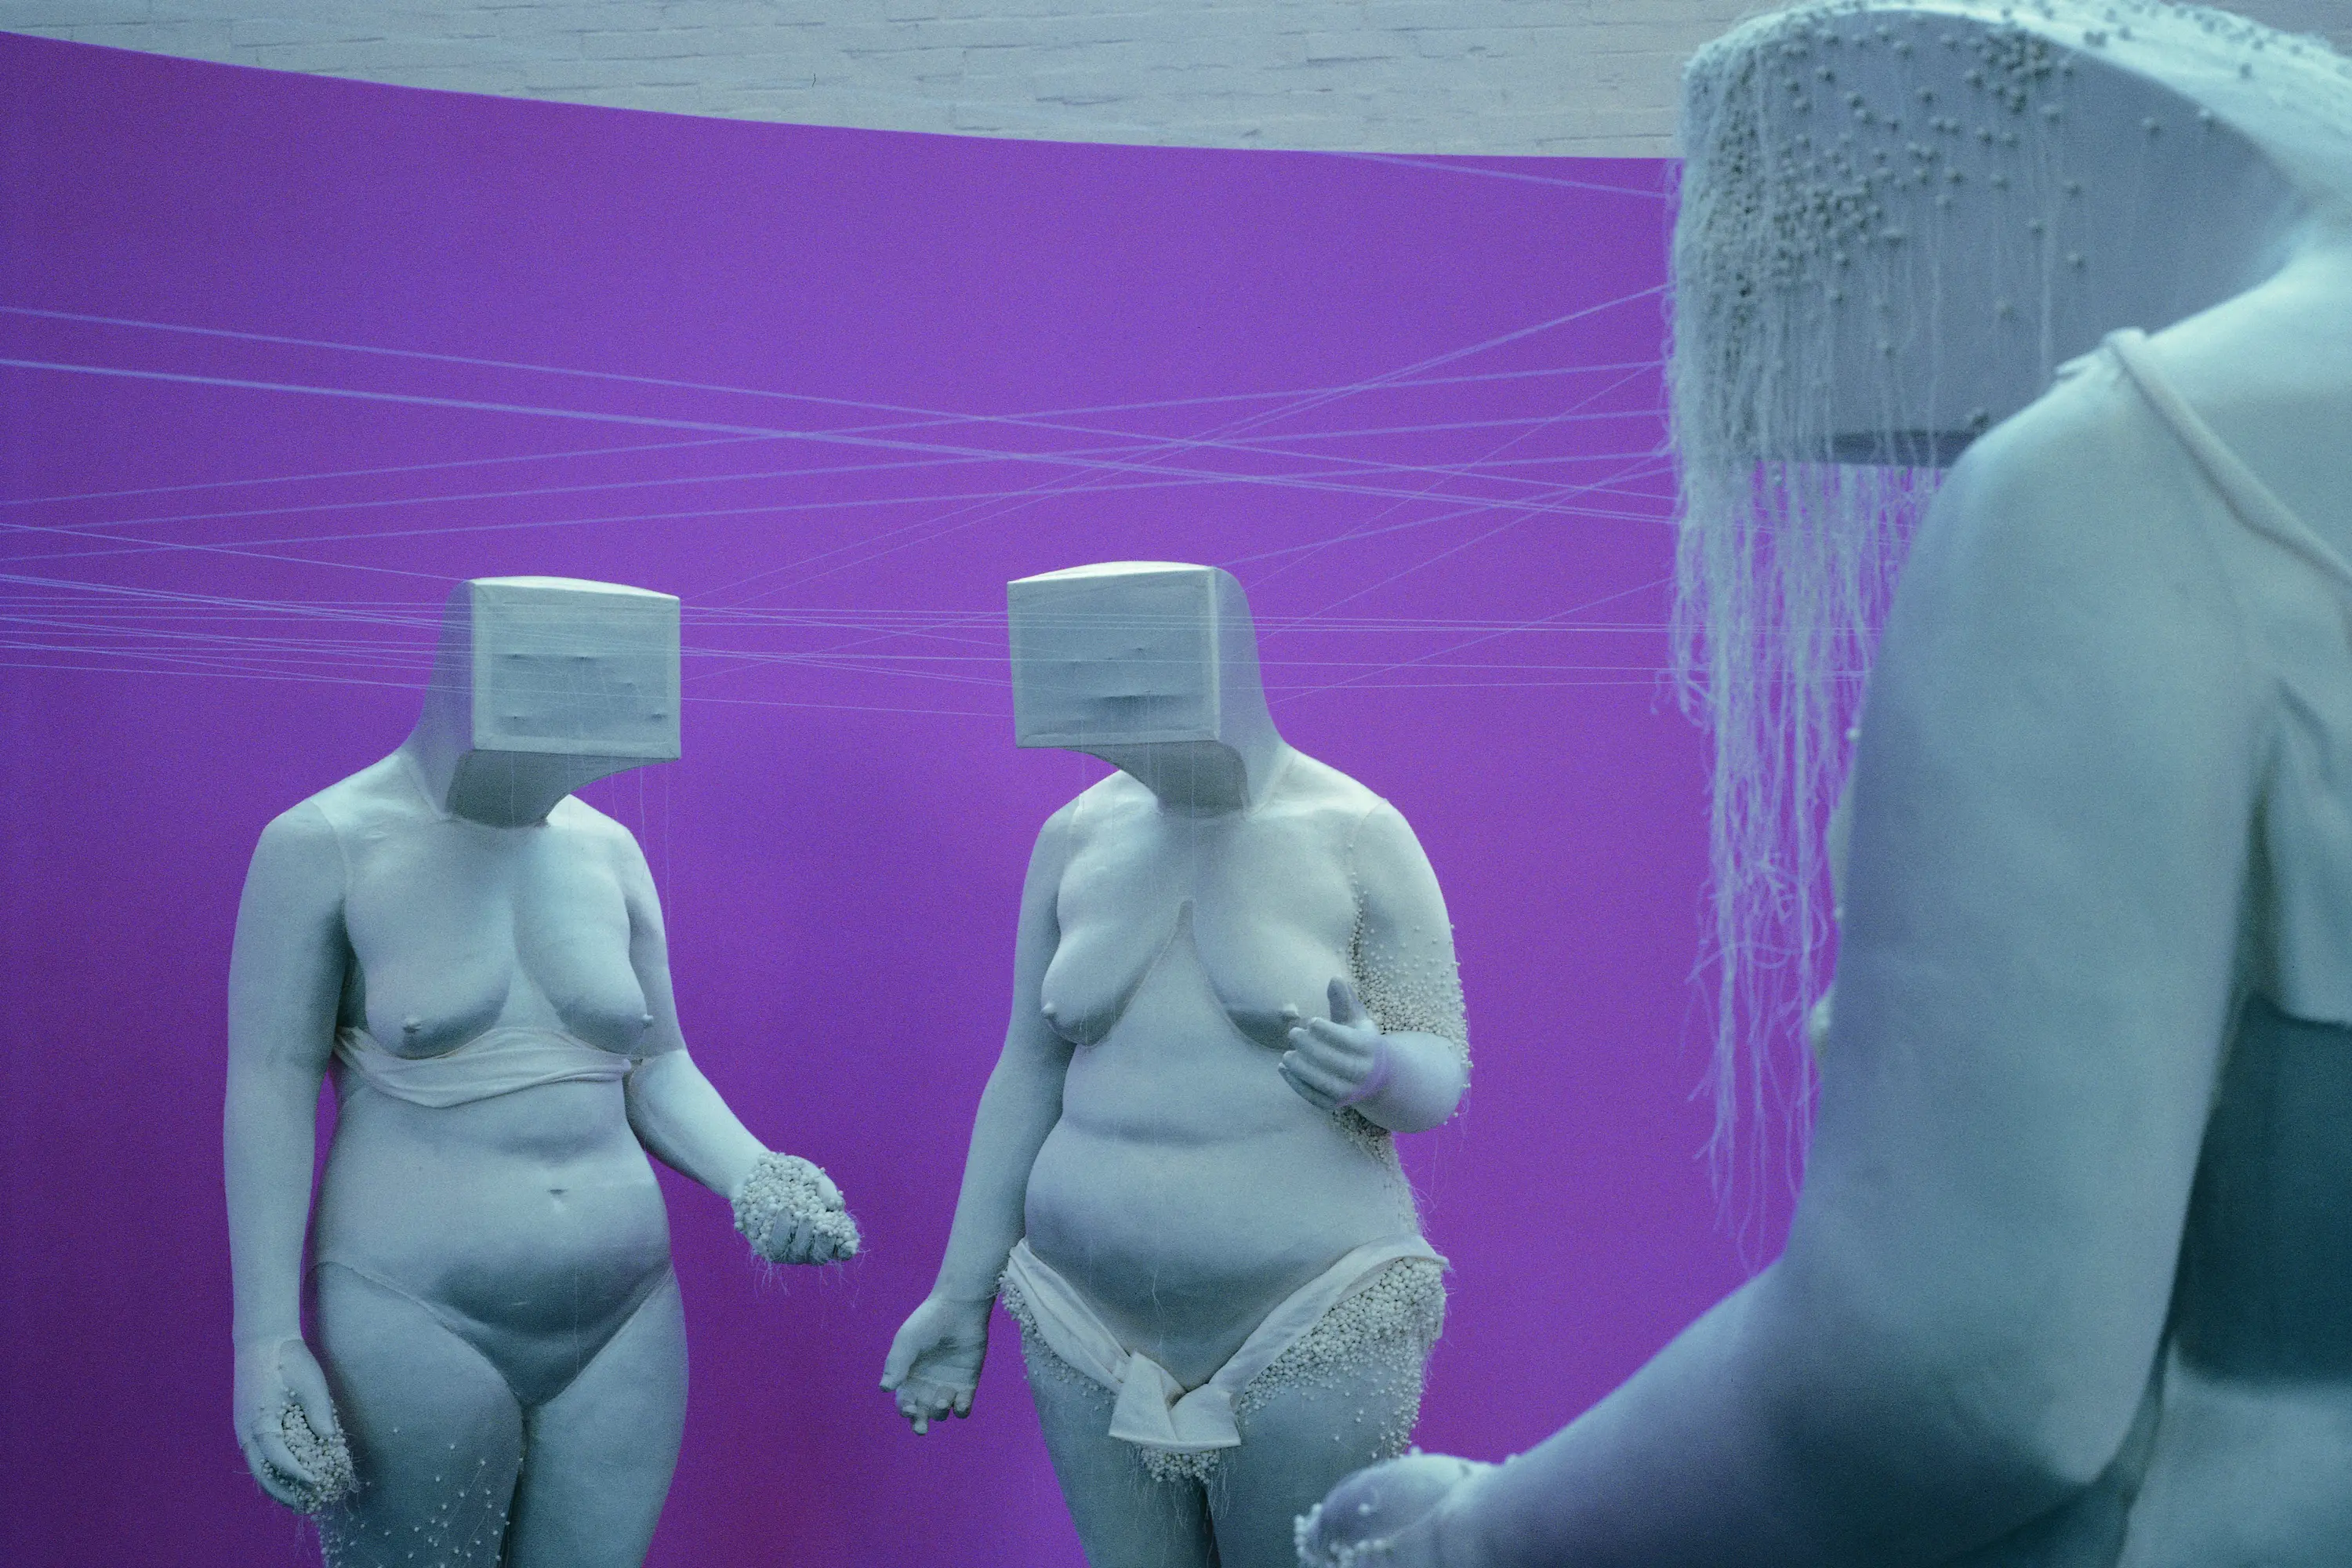 Naked female sculptures with boxes on their heads